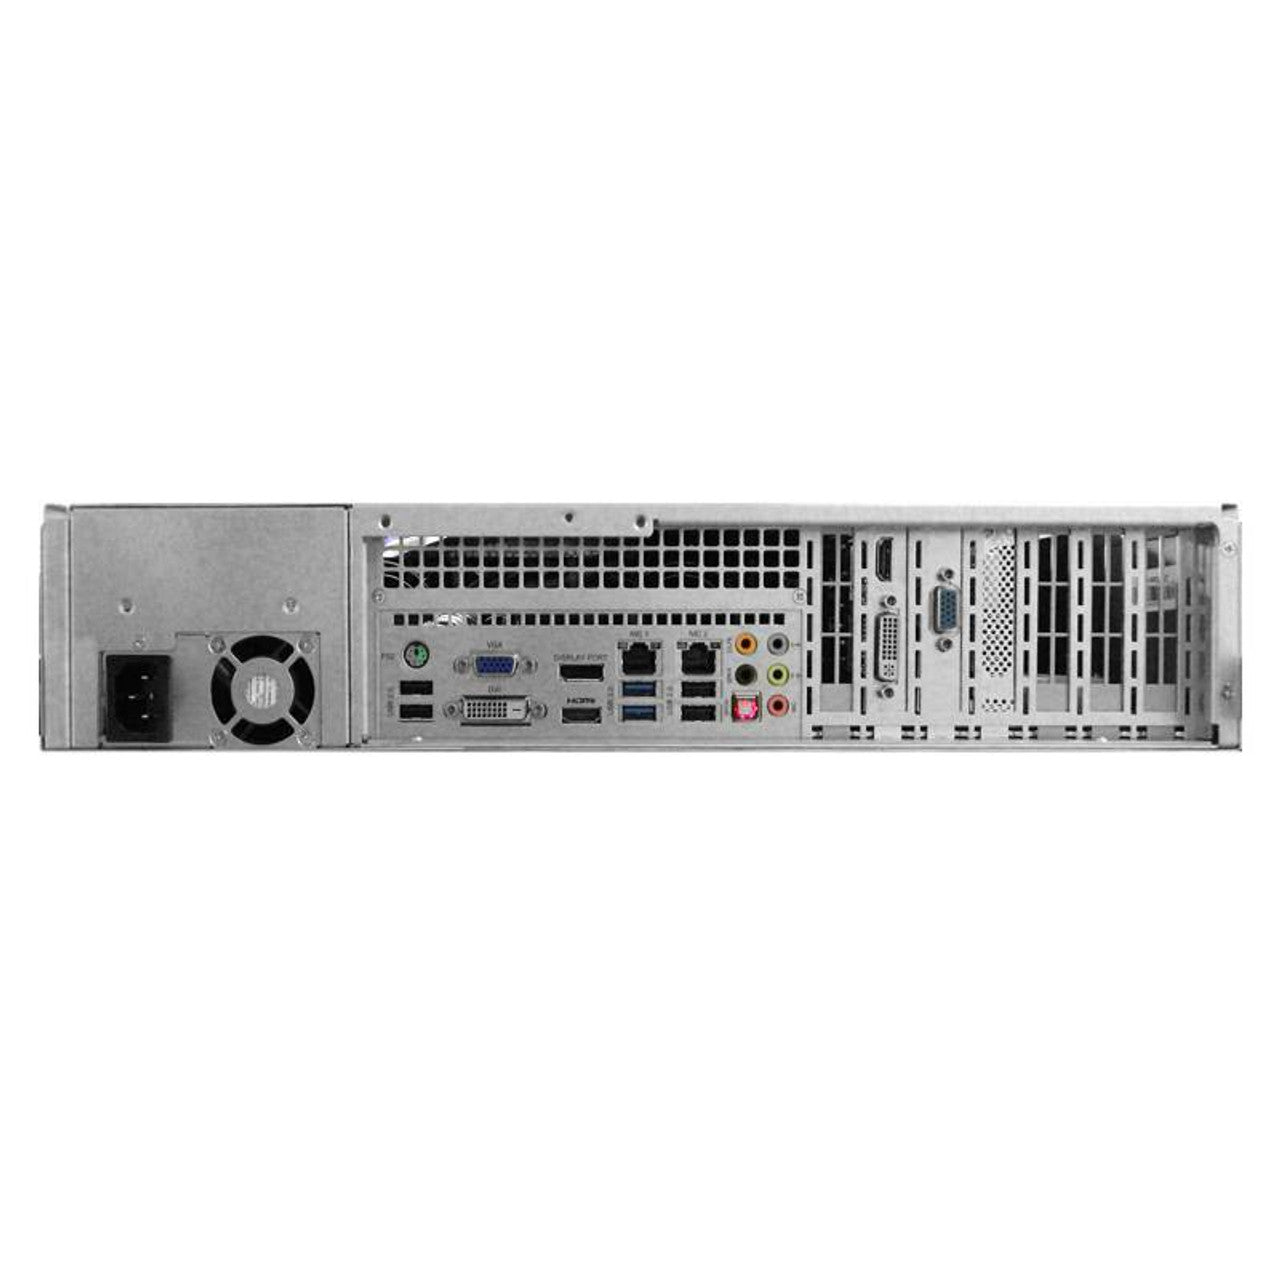 Digital Watchdog DW-BJP2U48T 128- Channel NVR with 48TB HDD included, Up to 128 Channel, Blackjack P-Rack